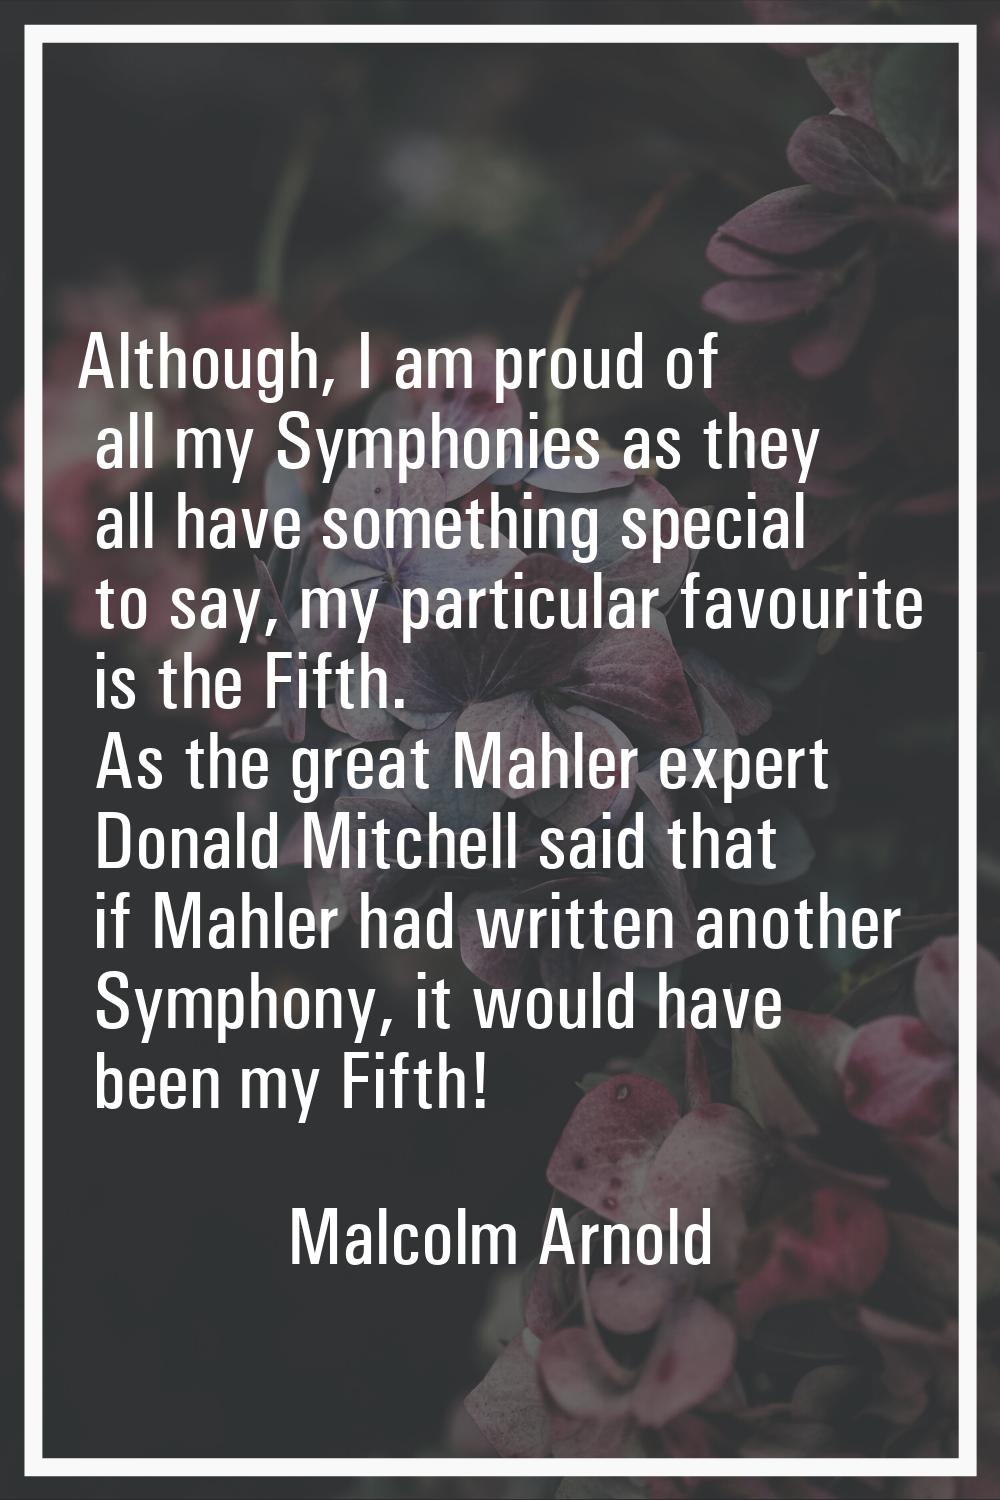 Although, I am proud of all my Symphonies as they all have something special to say, my particular 